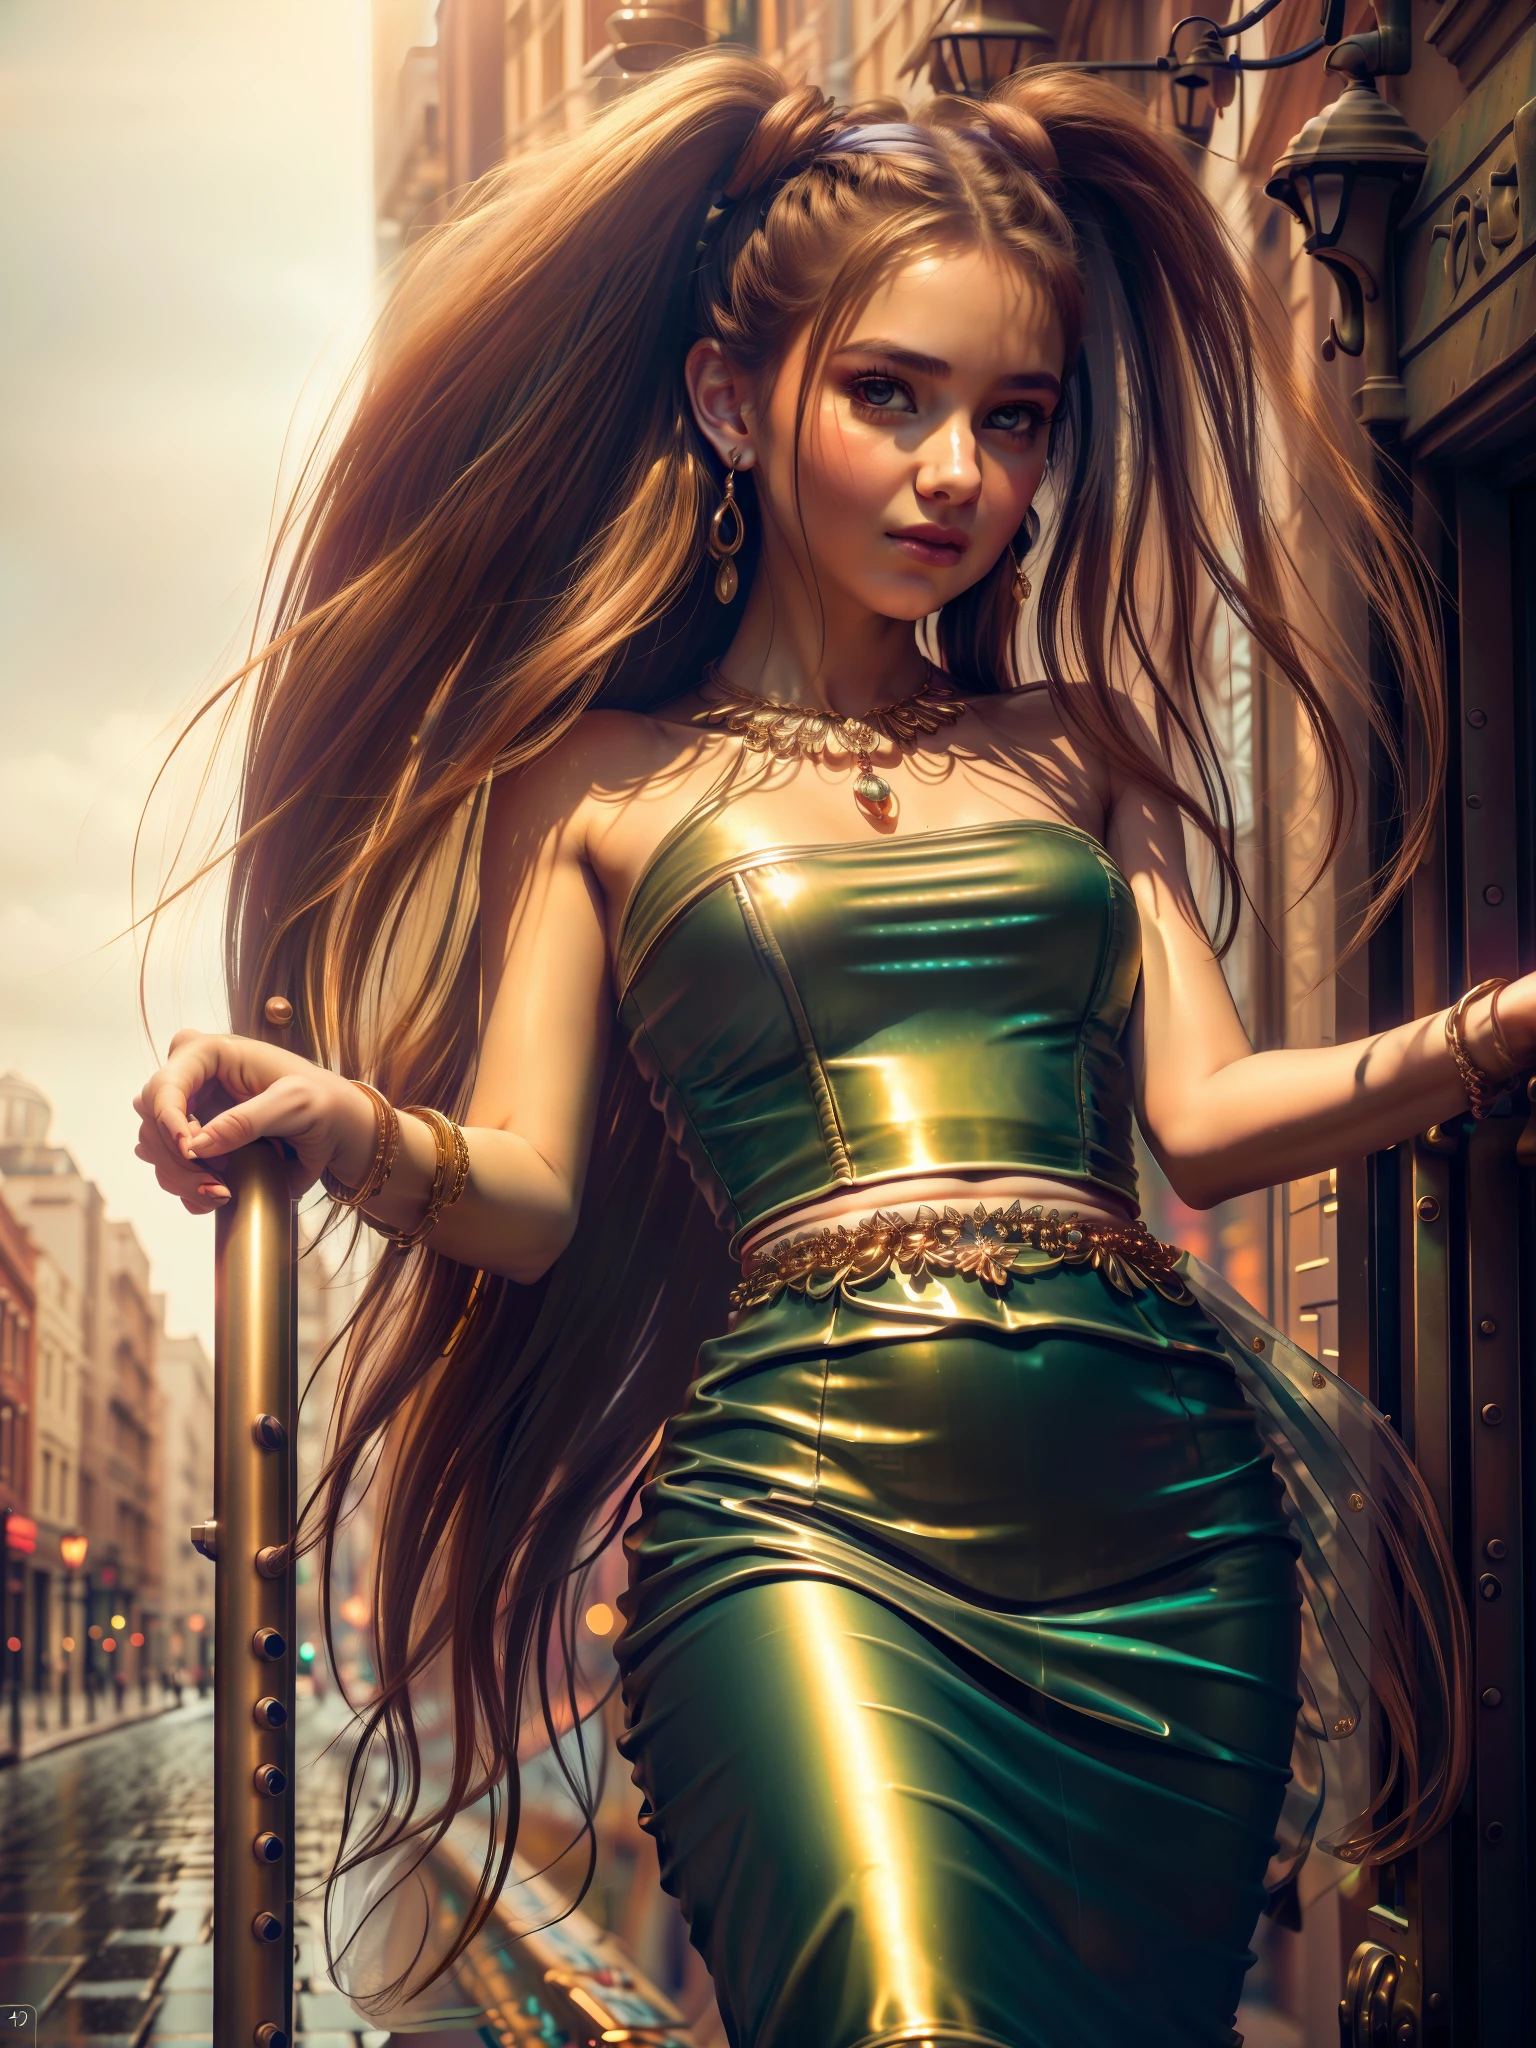 (standing in a dark street),(road light),(low-key lighting),(night),Random posture, (An extremely delicate and beautiful work), (masterpiece), 1girl, a girl in a white dress, highly detailed, waist leaking, ponytail contorted, charming expression, beautiful and clear eyes, green eye pupil, delicate necklace, delicate earrings, fairy ears, simple blurred background, extreme detail description, beautiful, charming, ultra-fine painting, delicate face, delicate figure, Fine collarbones, lovely lips, beautiful breasts, soft behind, mix4,(8k, RAW photo, best quality, masterpiece:1.2), (realistic, photo-realistic:1.37),1girl,cute,cityscape, night, rain, wet, professional lighting, photon mapping, radiosity, physically-based rendering,